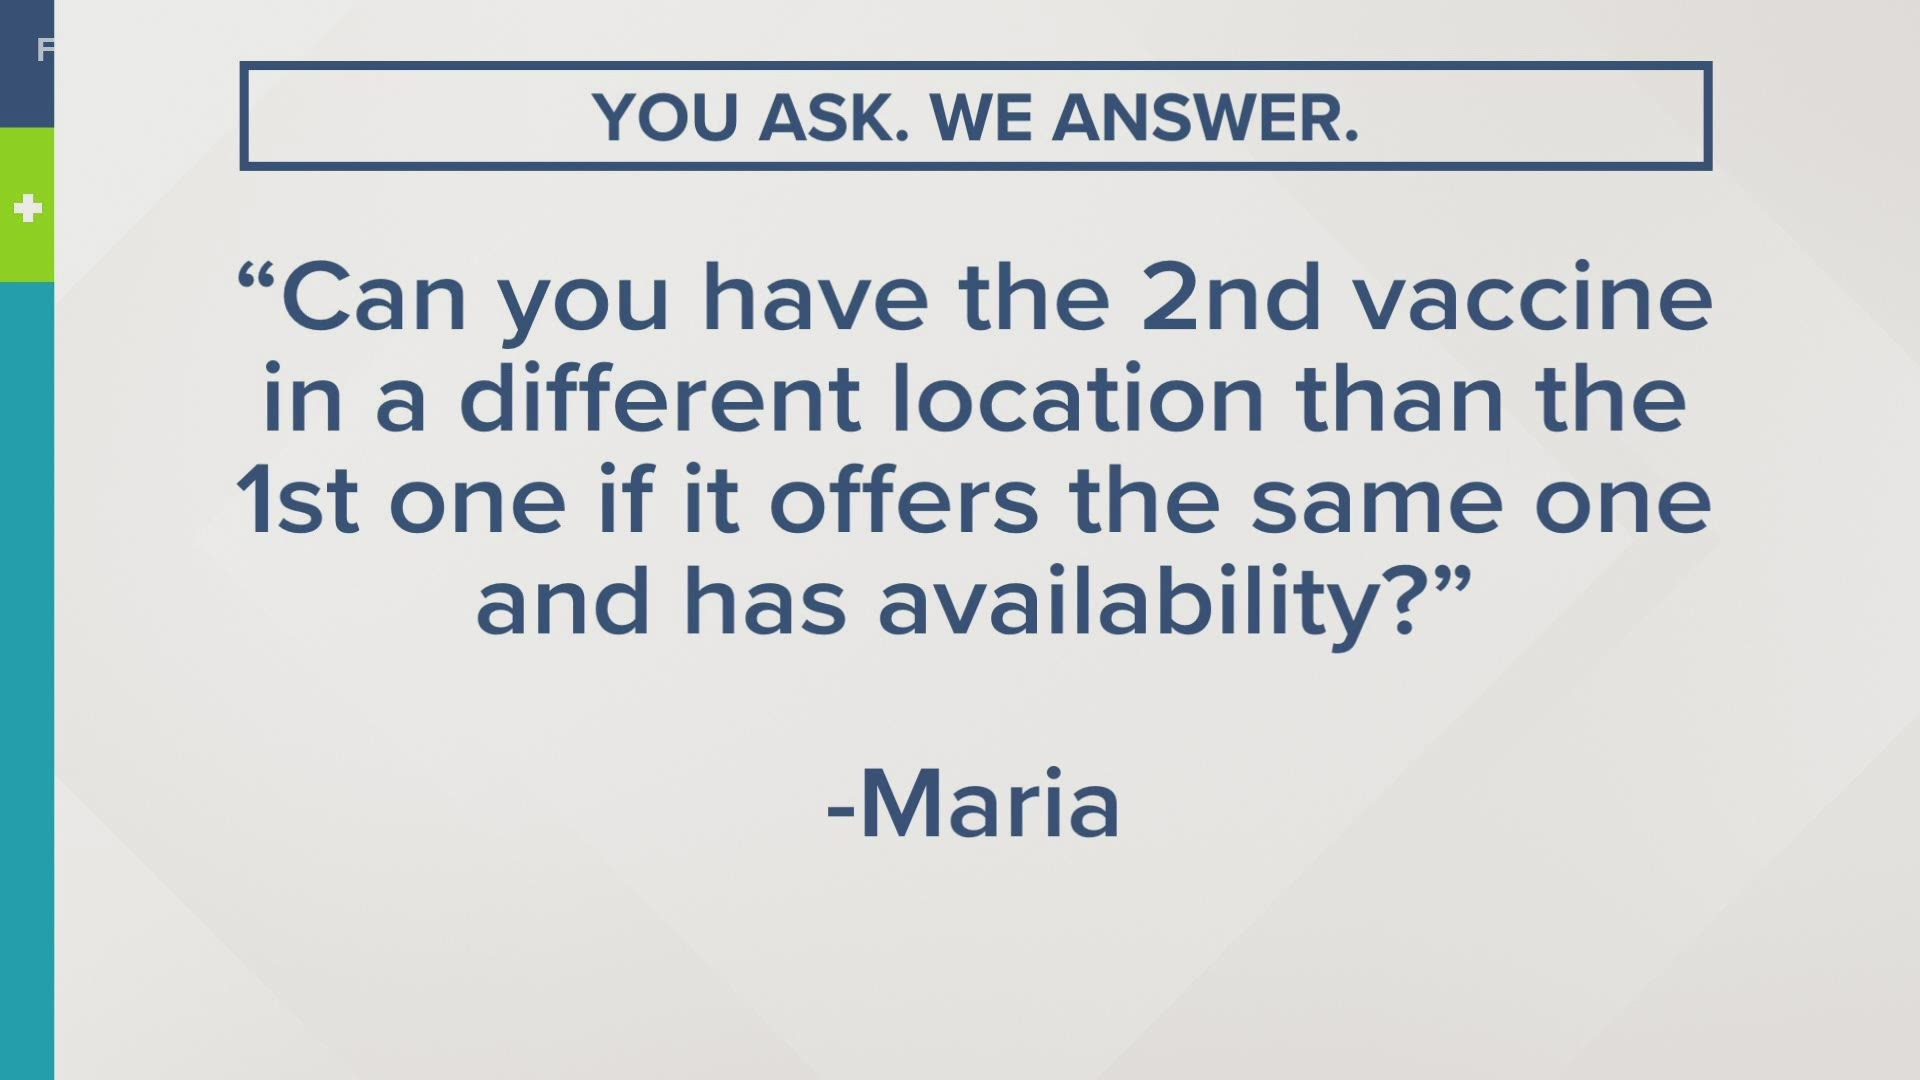 If you have a question about the COVID-19 vaccine, email SHARE61@fox61.com or text 860-527-6161.